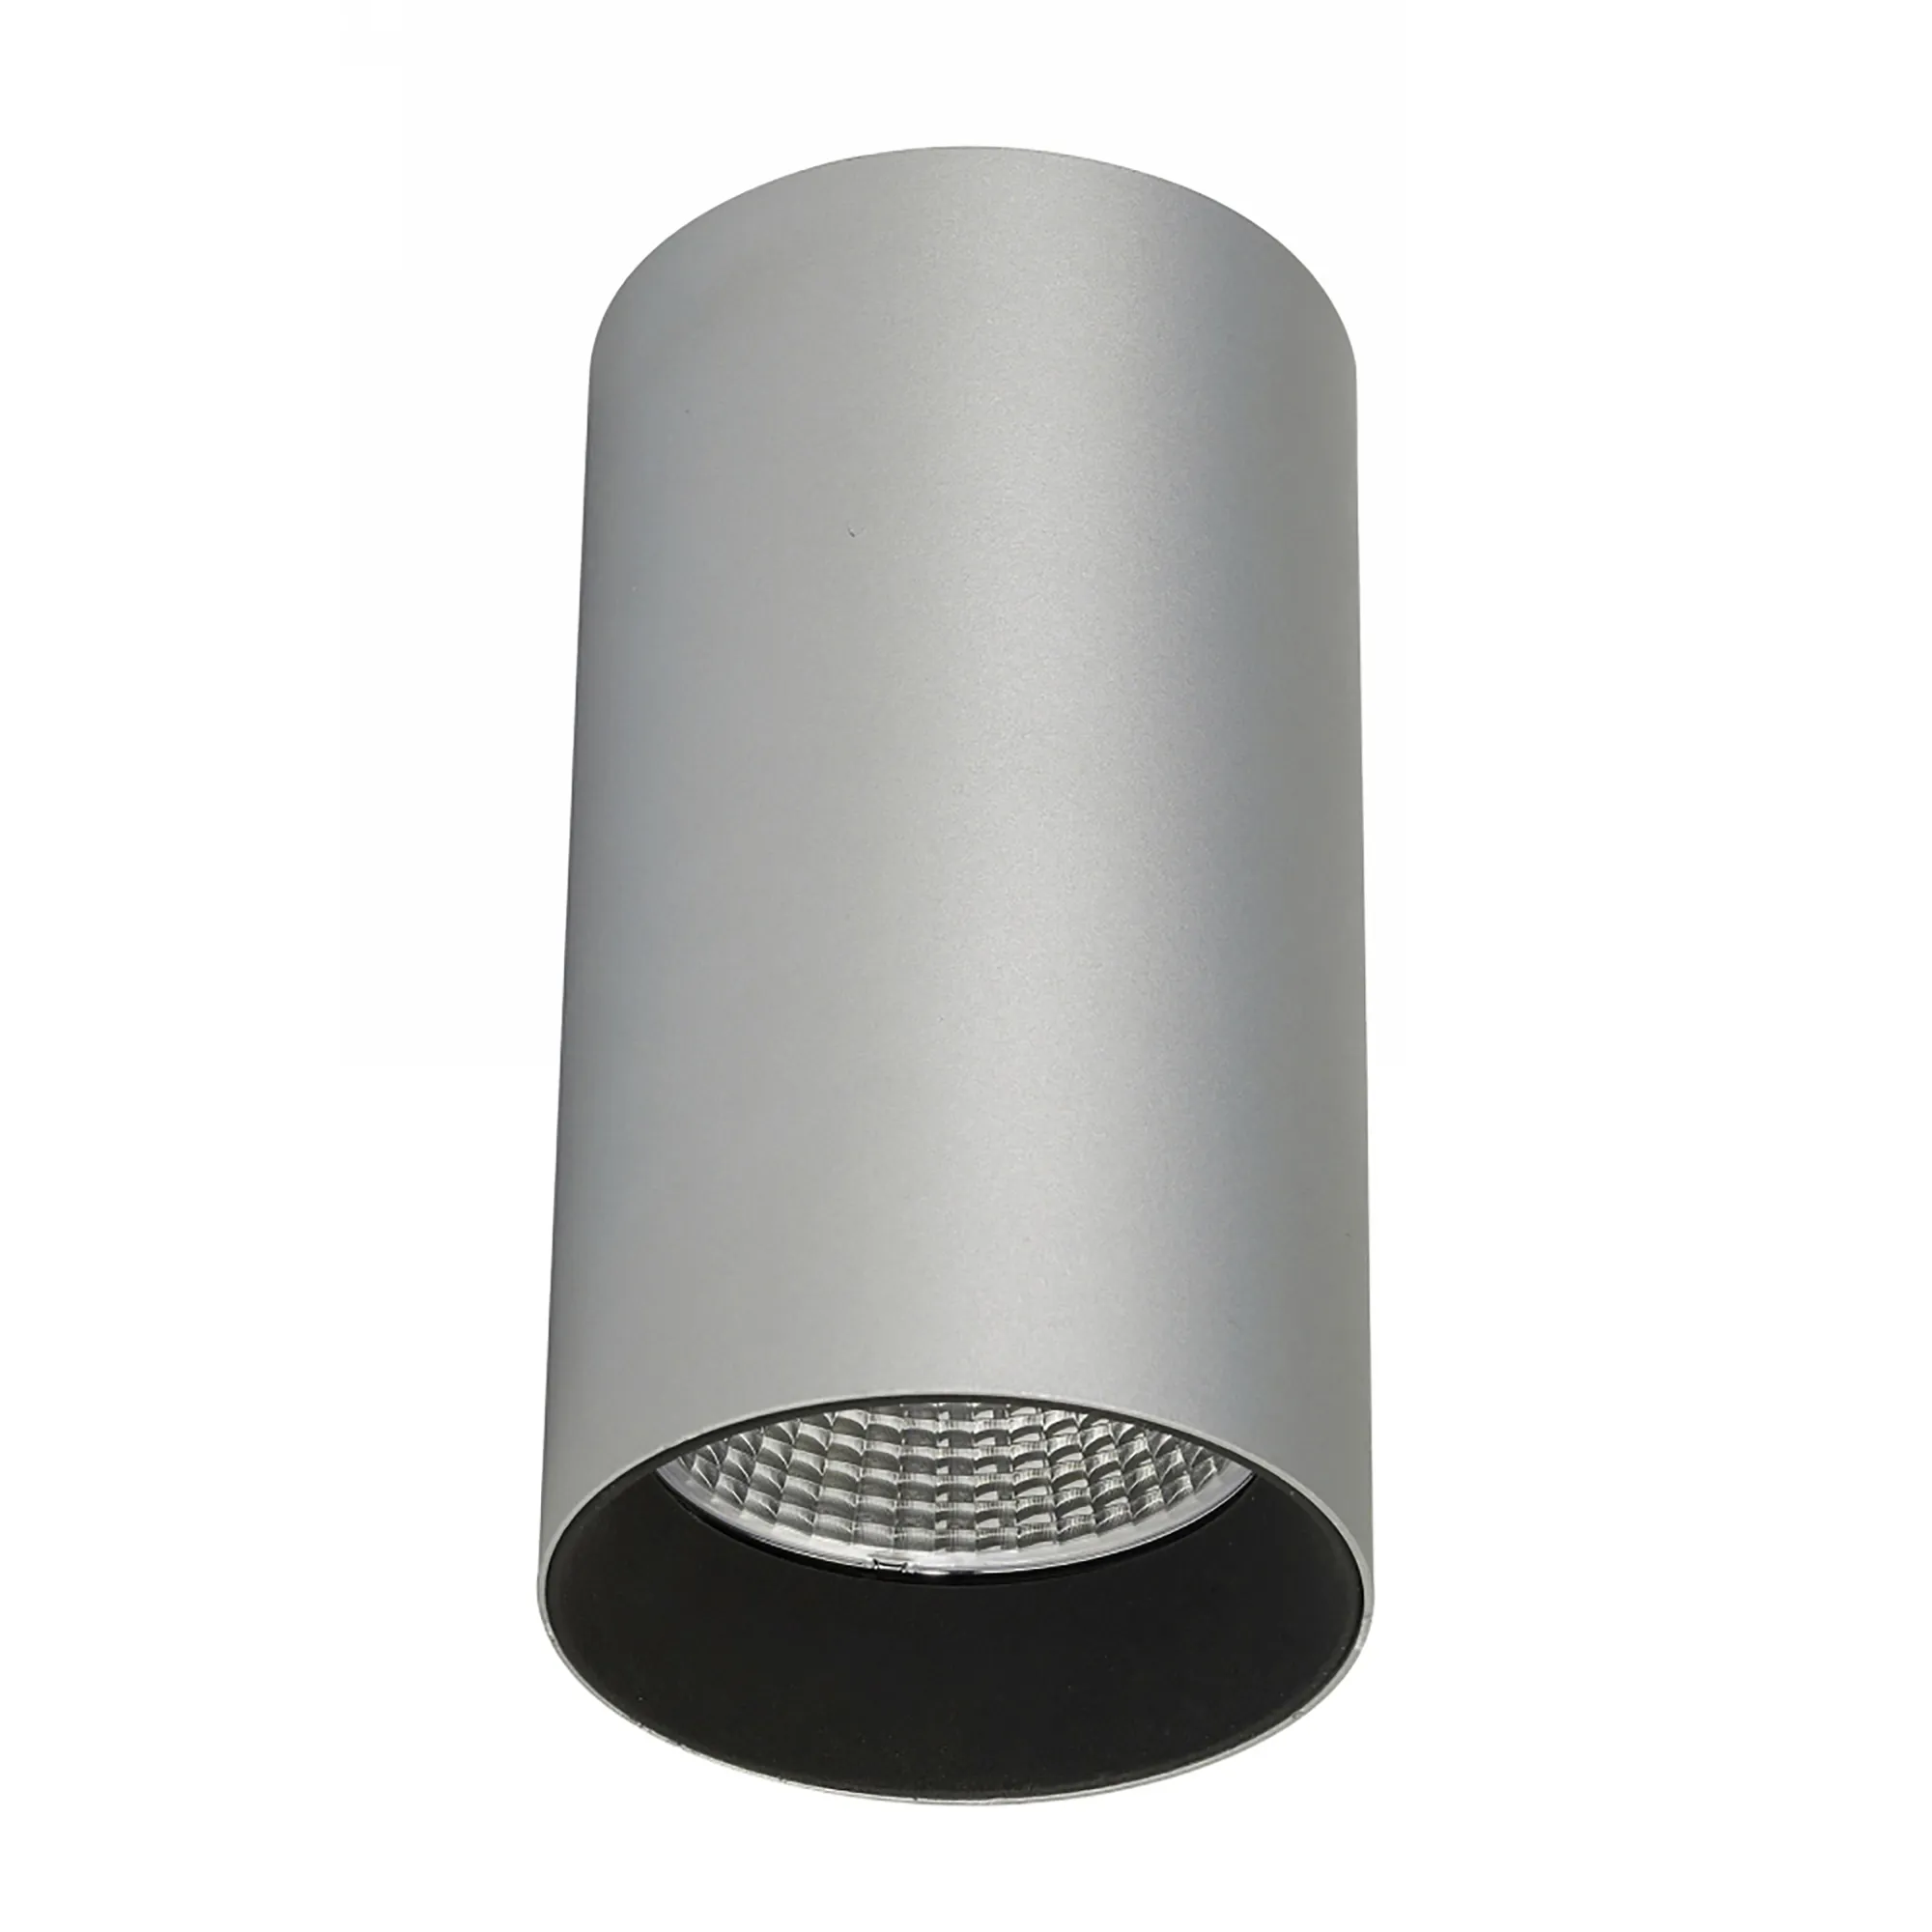 DL300019  Eos 15; 15W Silver & Black Surface LED Spotlight 1300lm 40° 5000K Pure White IP20